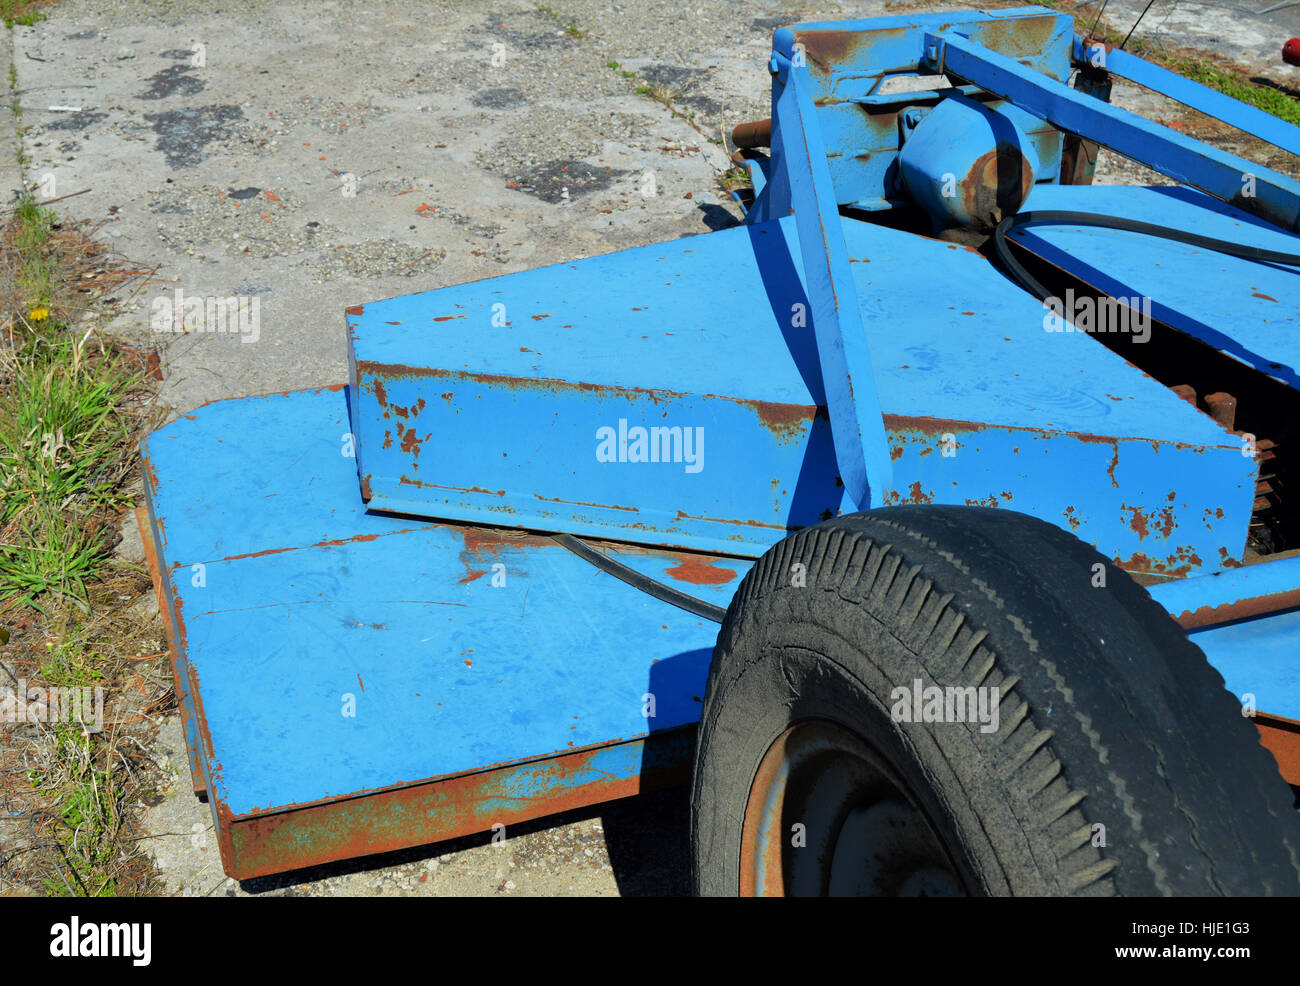 A blue industrial lawn mower sitting deserted on  broken concrete and weeds. Stock Photo